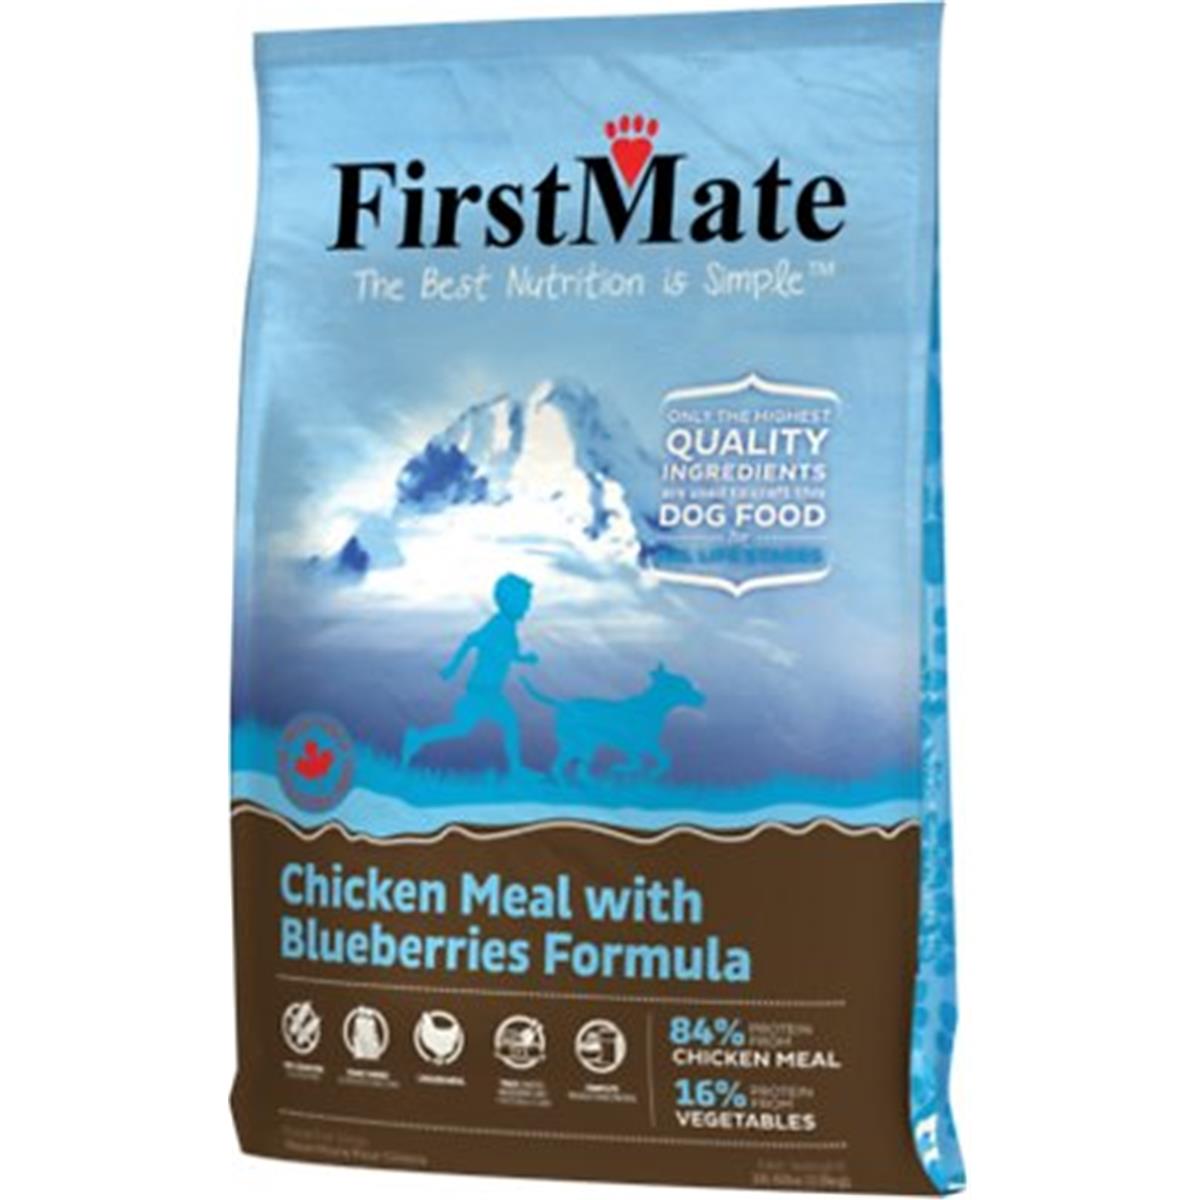 Fi10066 Chicken Meal With Blueberries Formula Grain-free Dry Dog Food